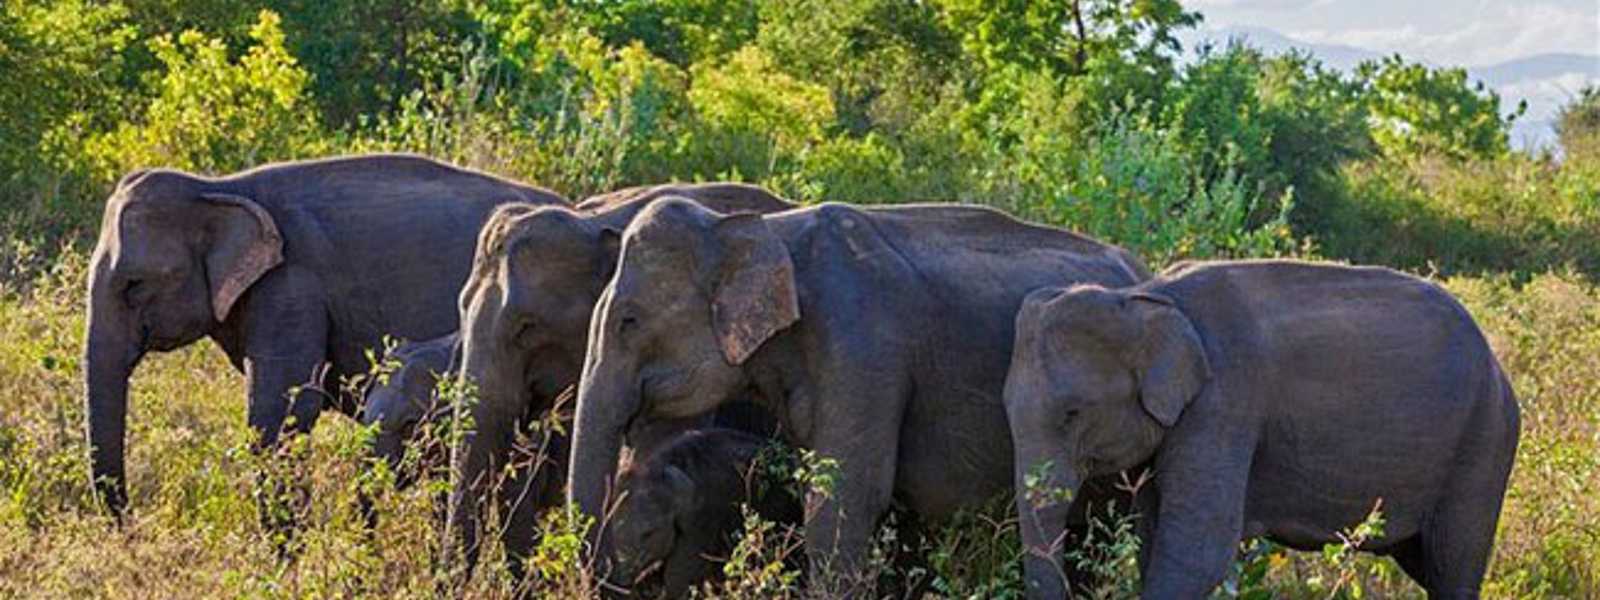 Elephants removed from ‘crop damaging animals’ list